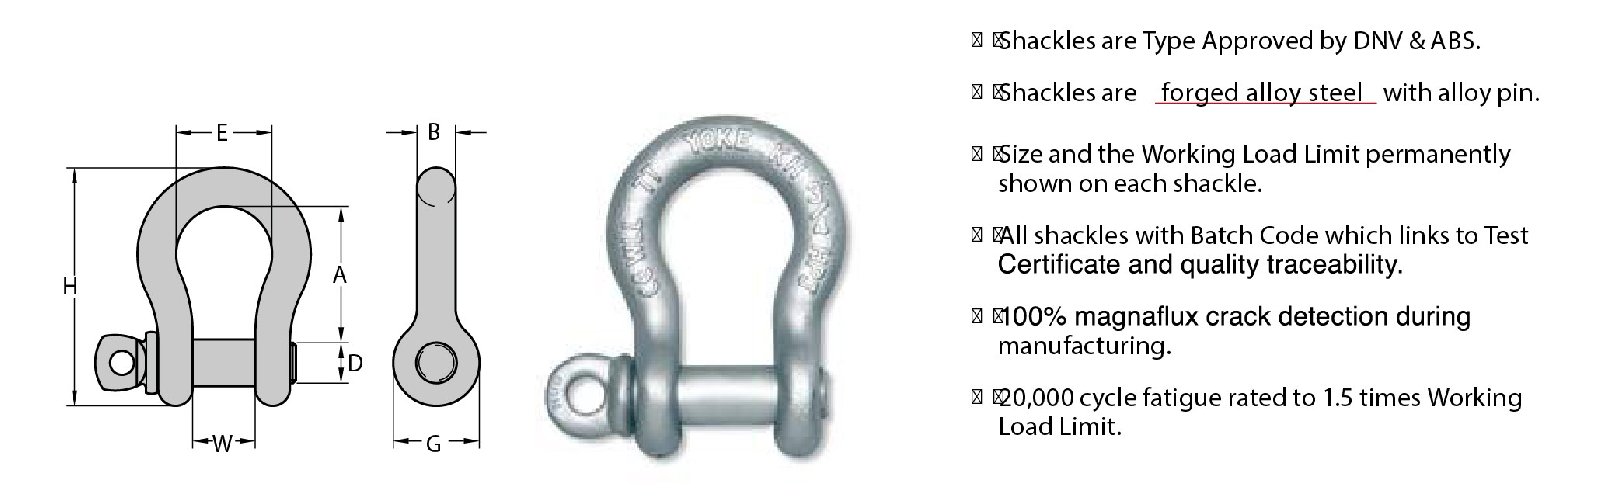 G80 FORGED ALLOY ANCHOR SHACKLE WITH SCREW PIN